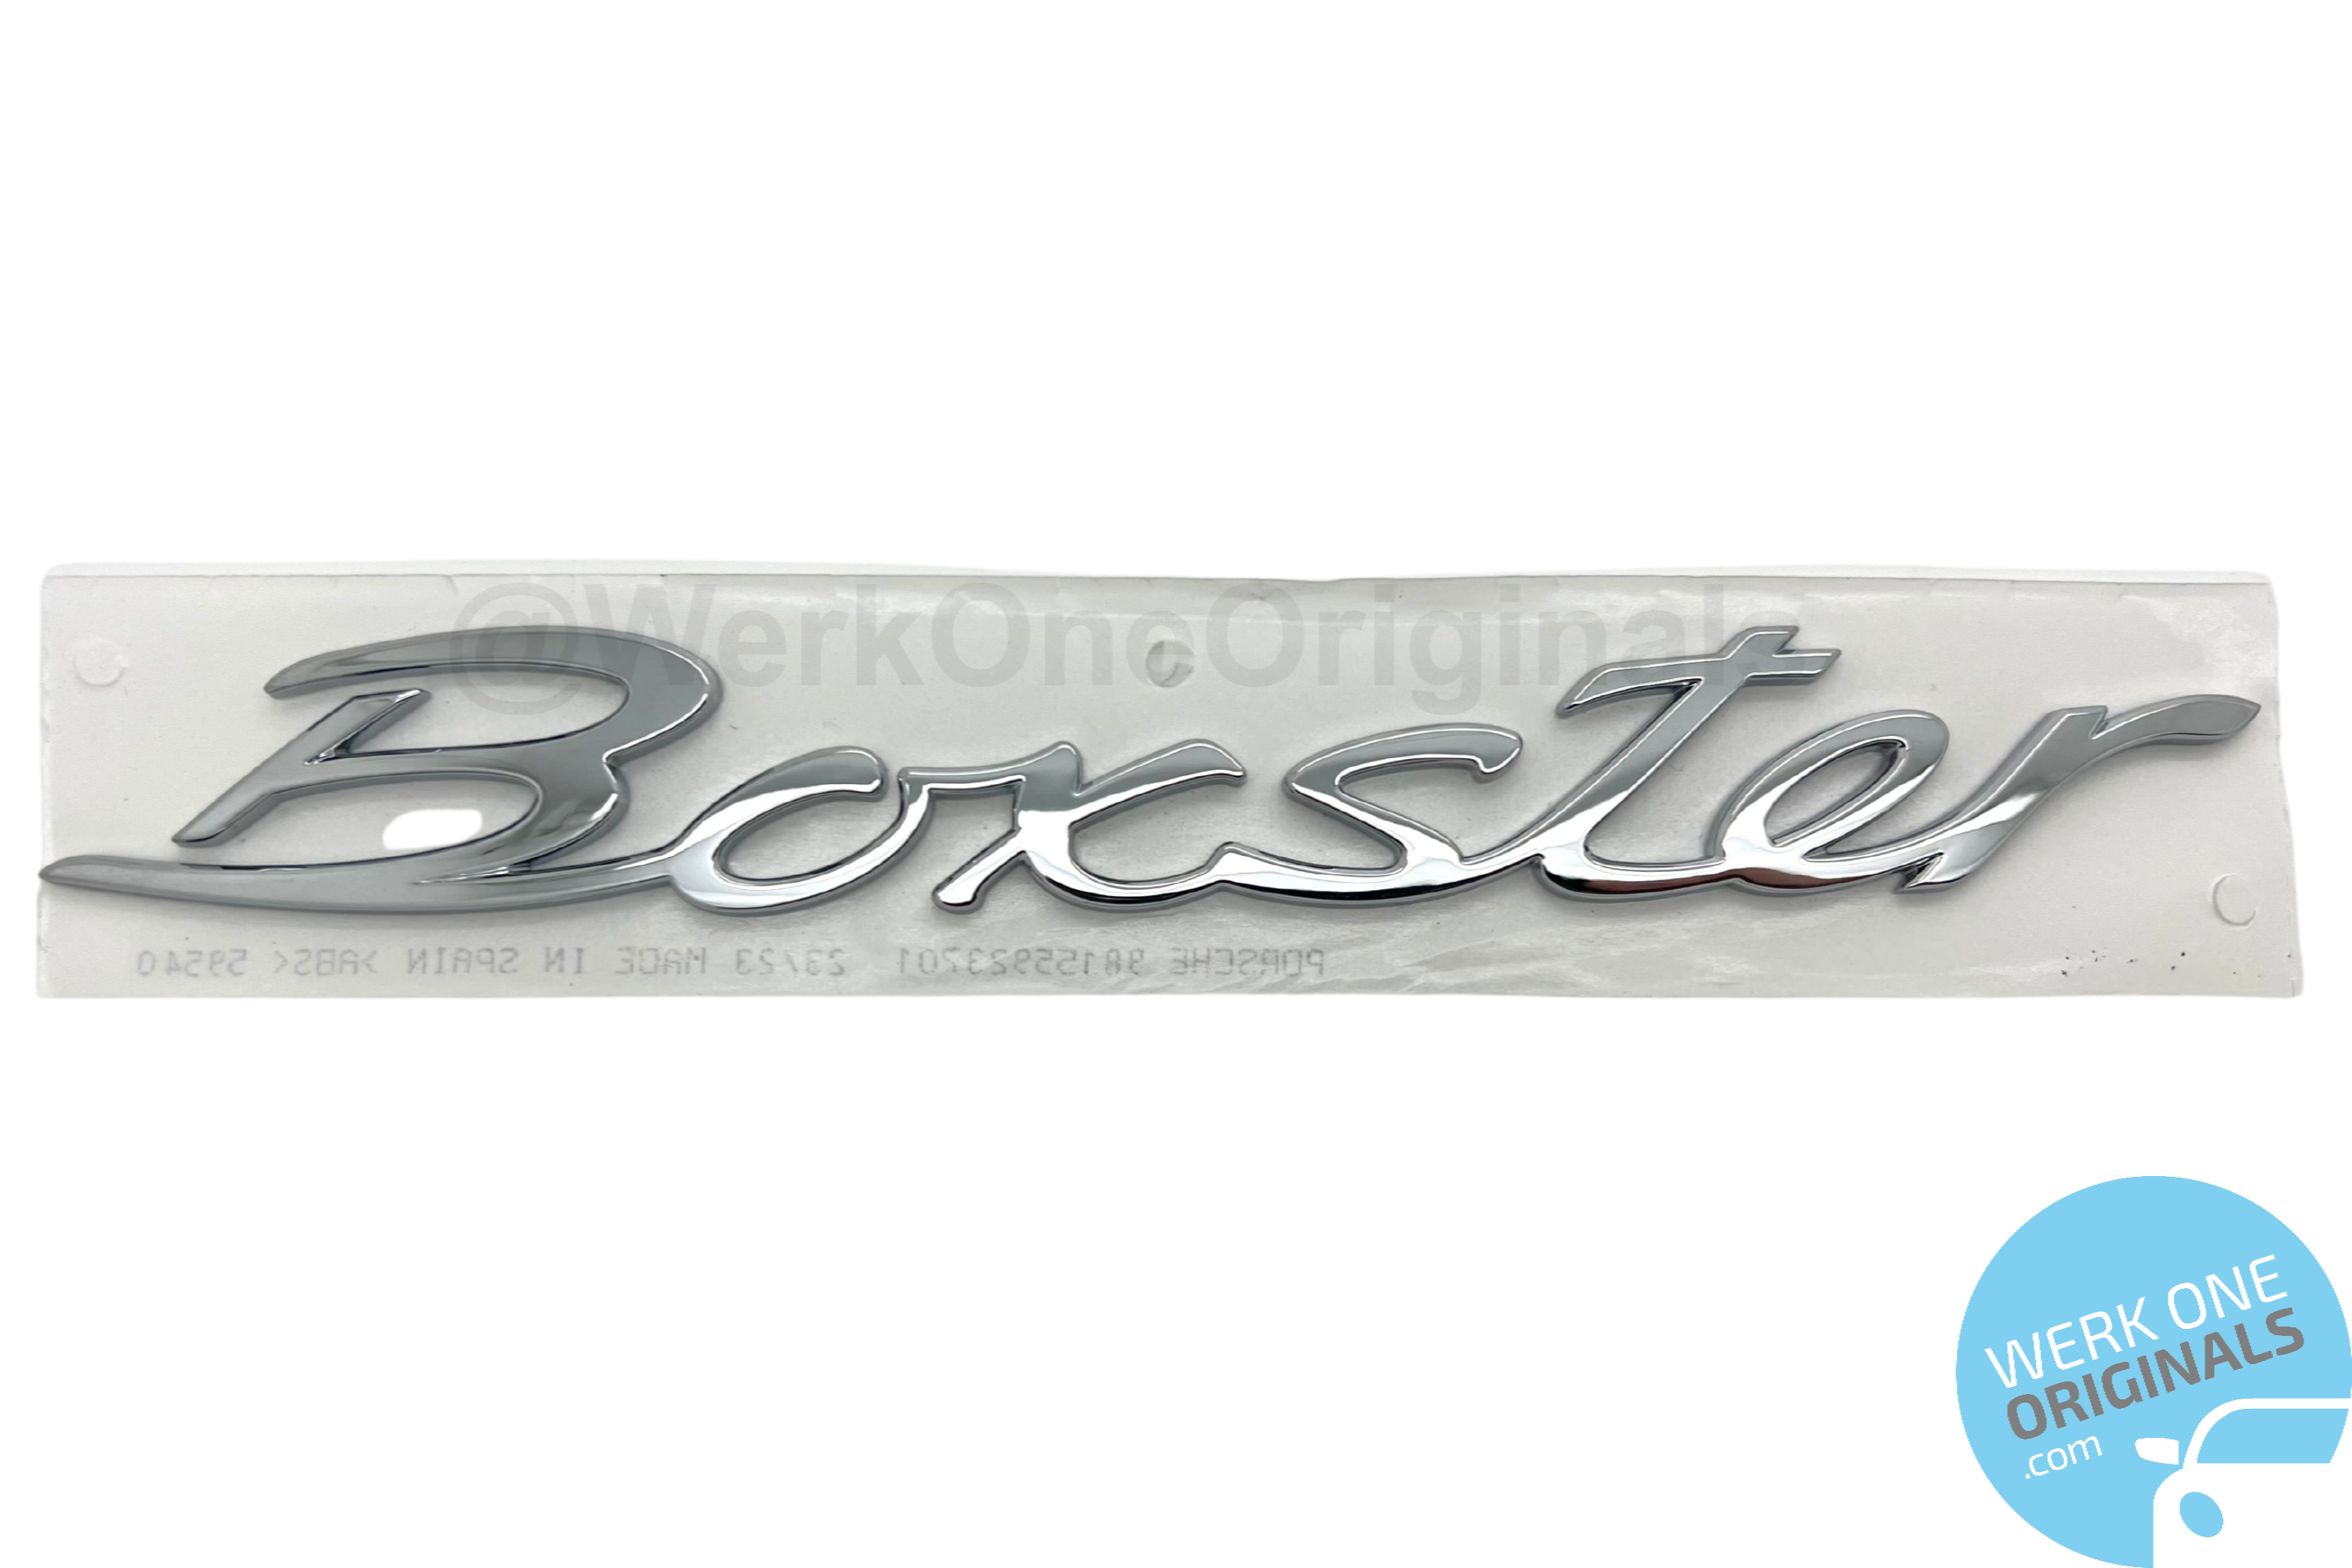 Porsche Official 'Boxster' Rear Badge Decal in Chrome Silver for Boxster Type 718 Models